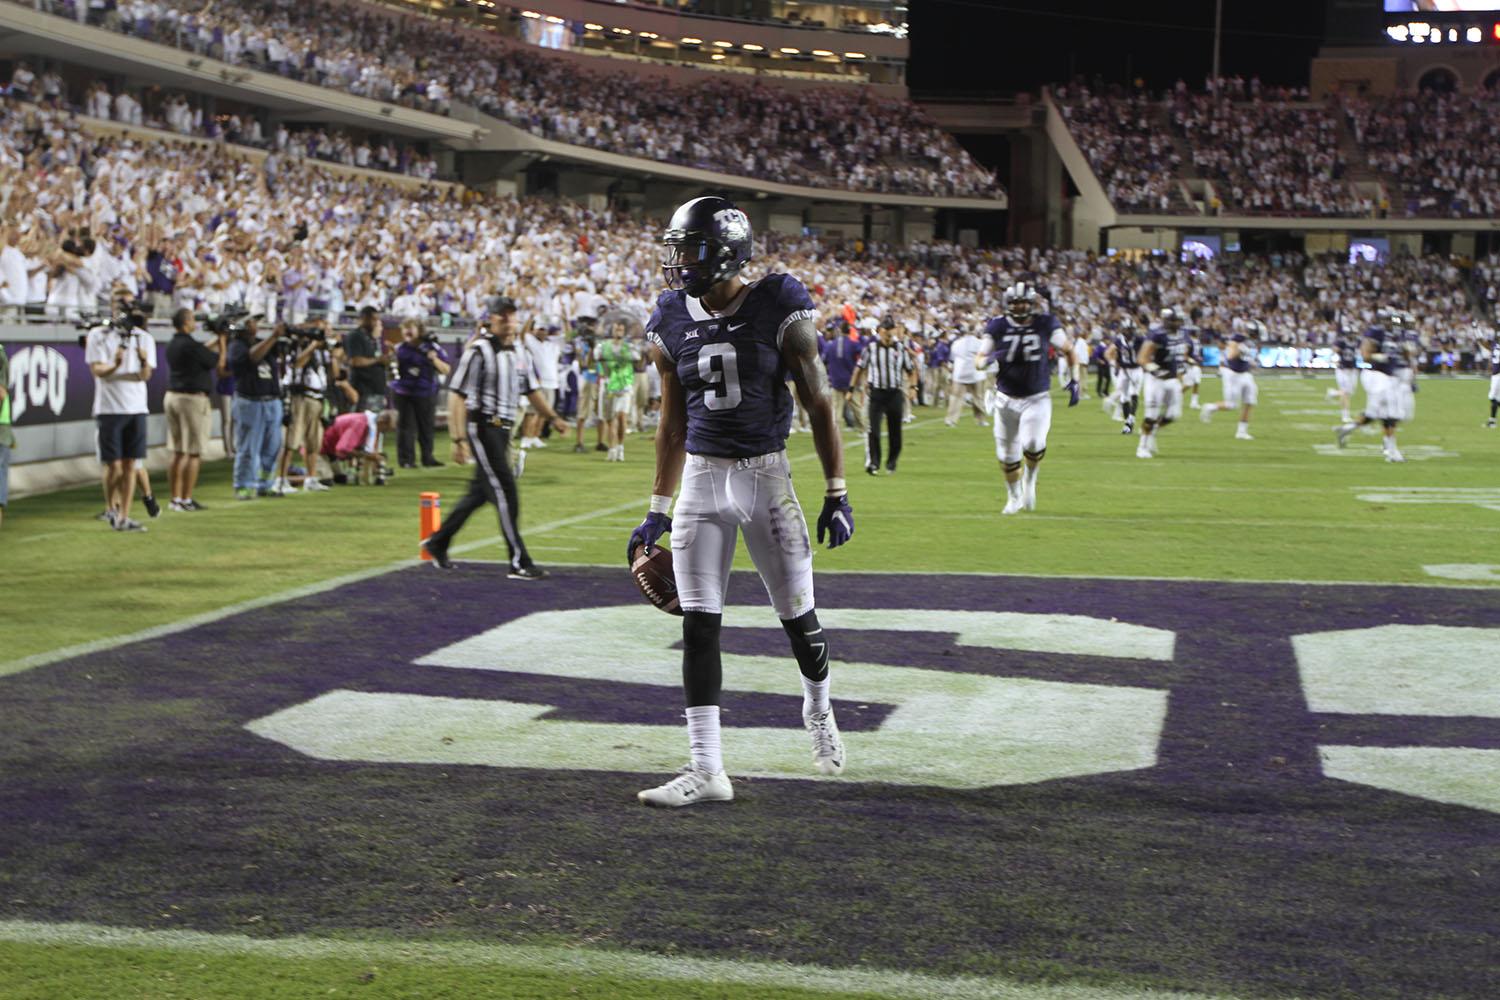 Josh Doctson in the end zone during TCU's 56-37 victory over SMU Saturday night.